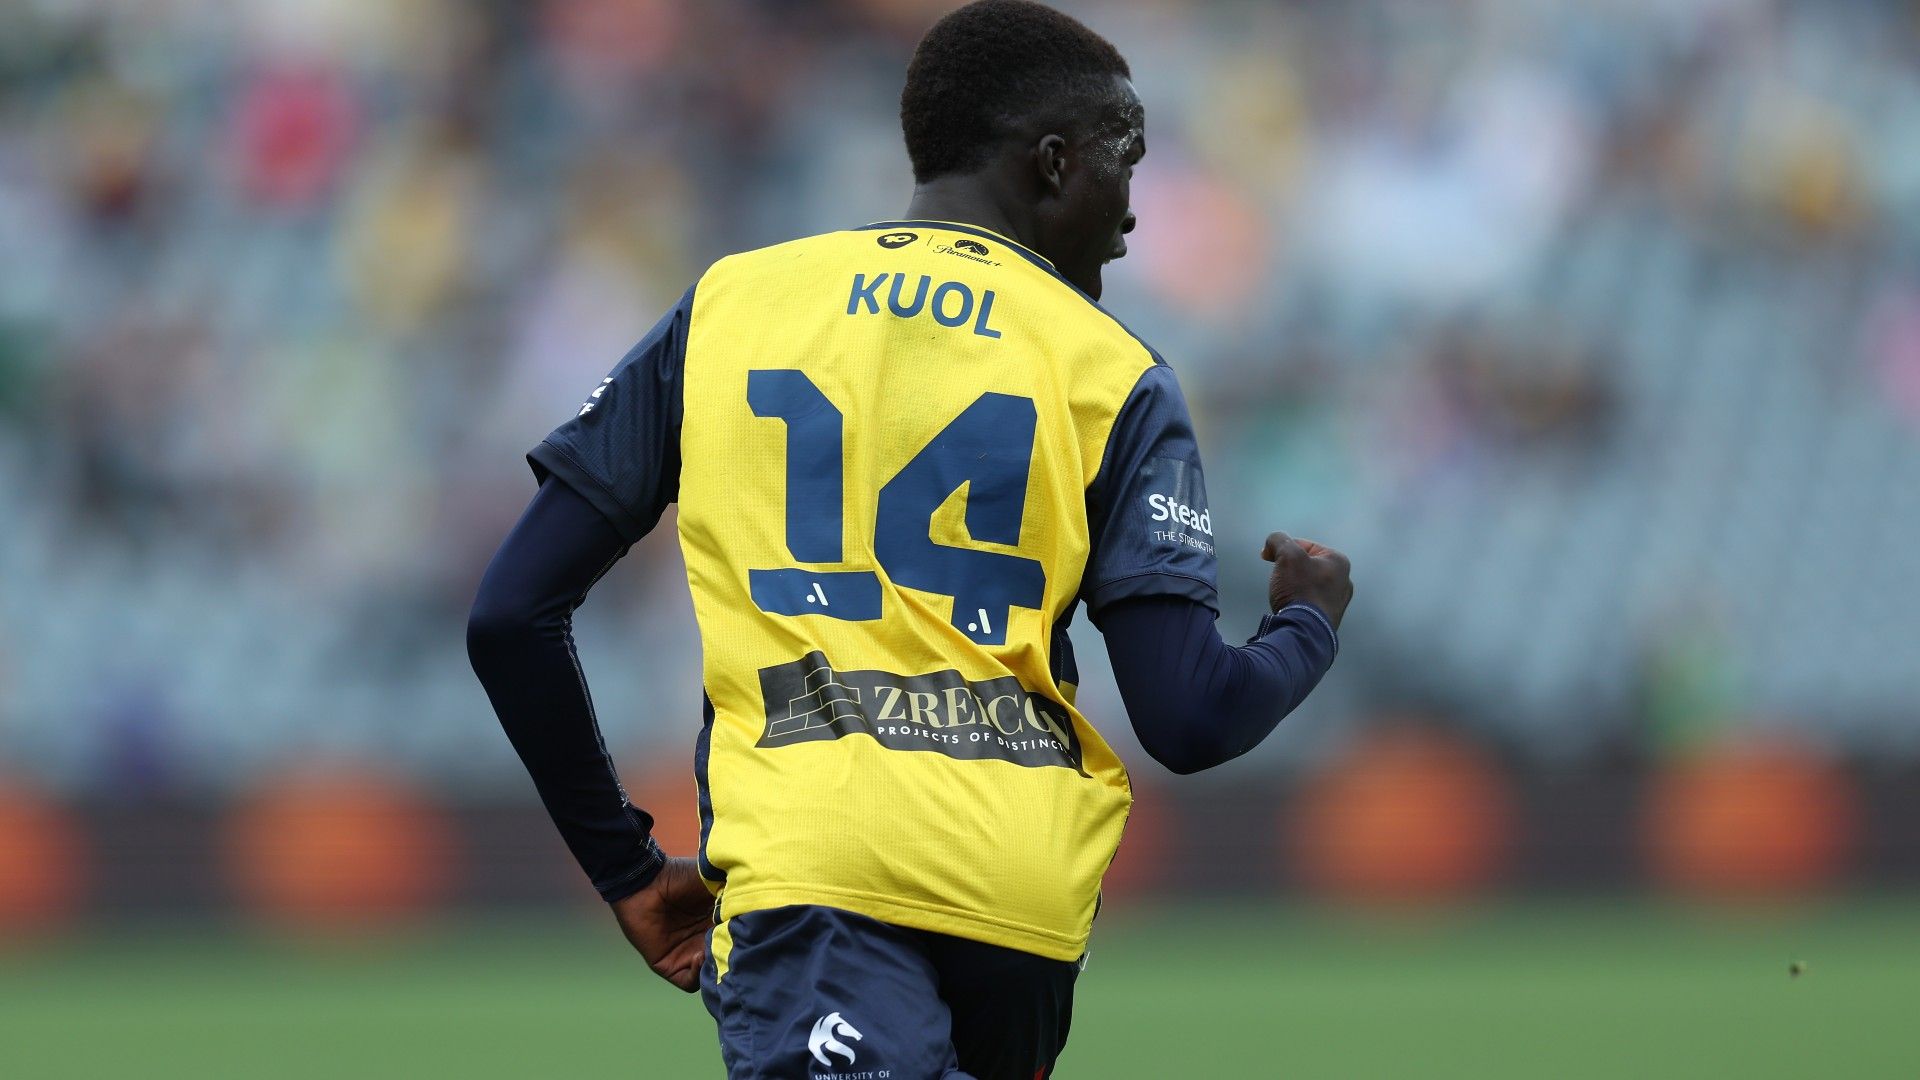 Garang Kuol scores incredible goal as World Cup preprations wrap up in A-League